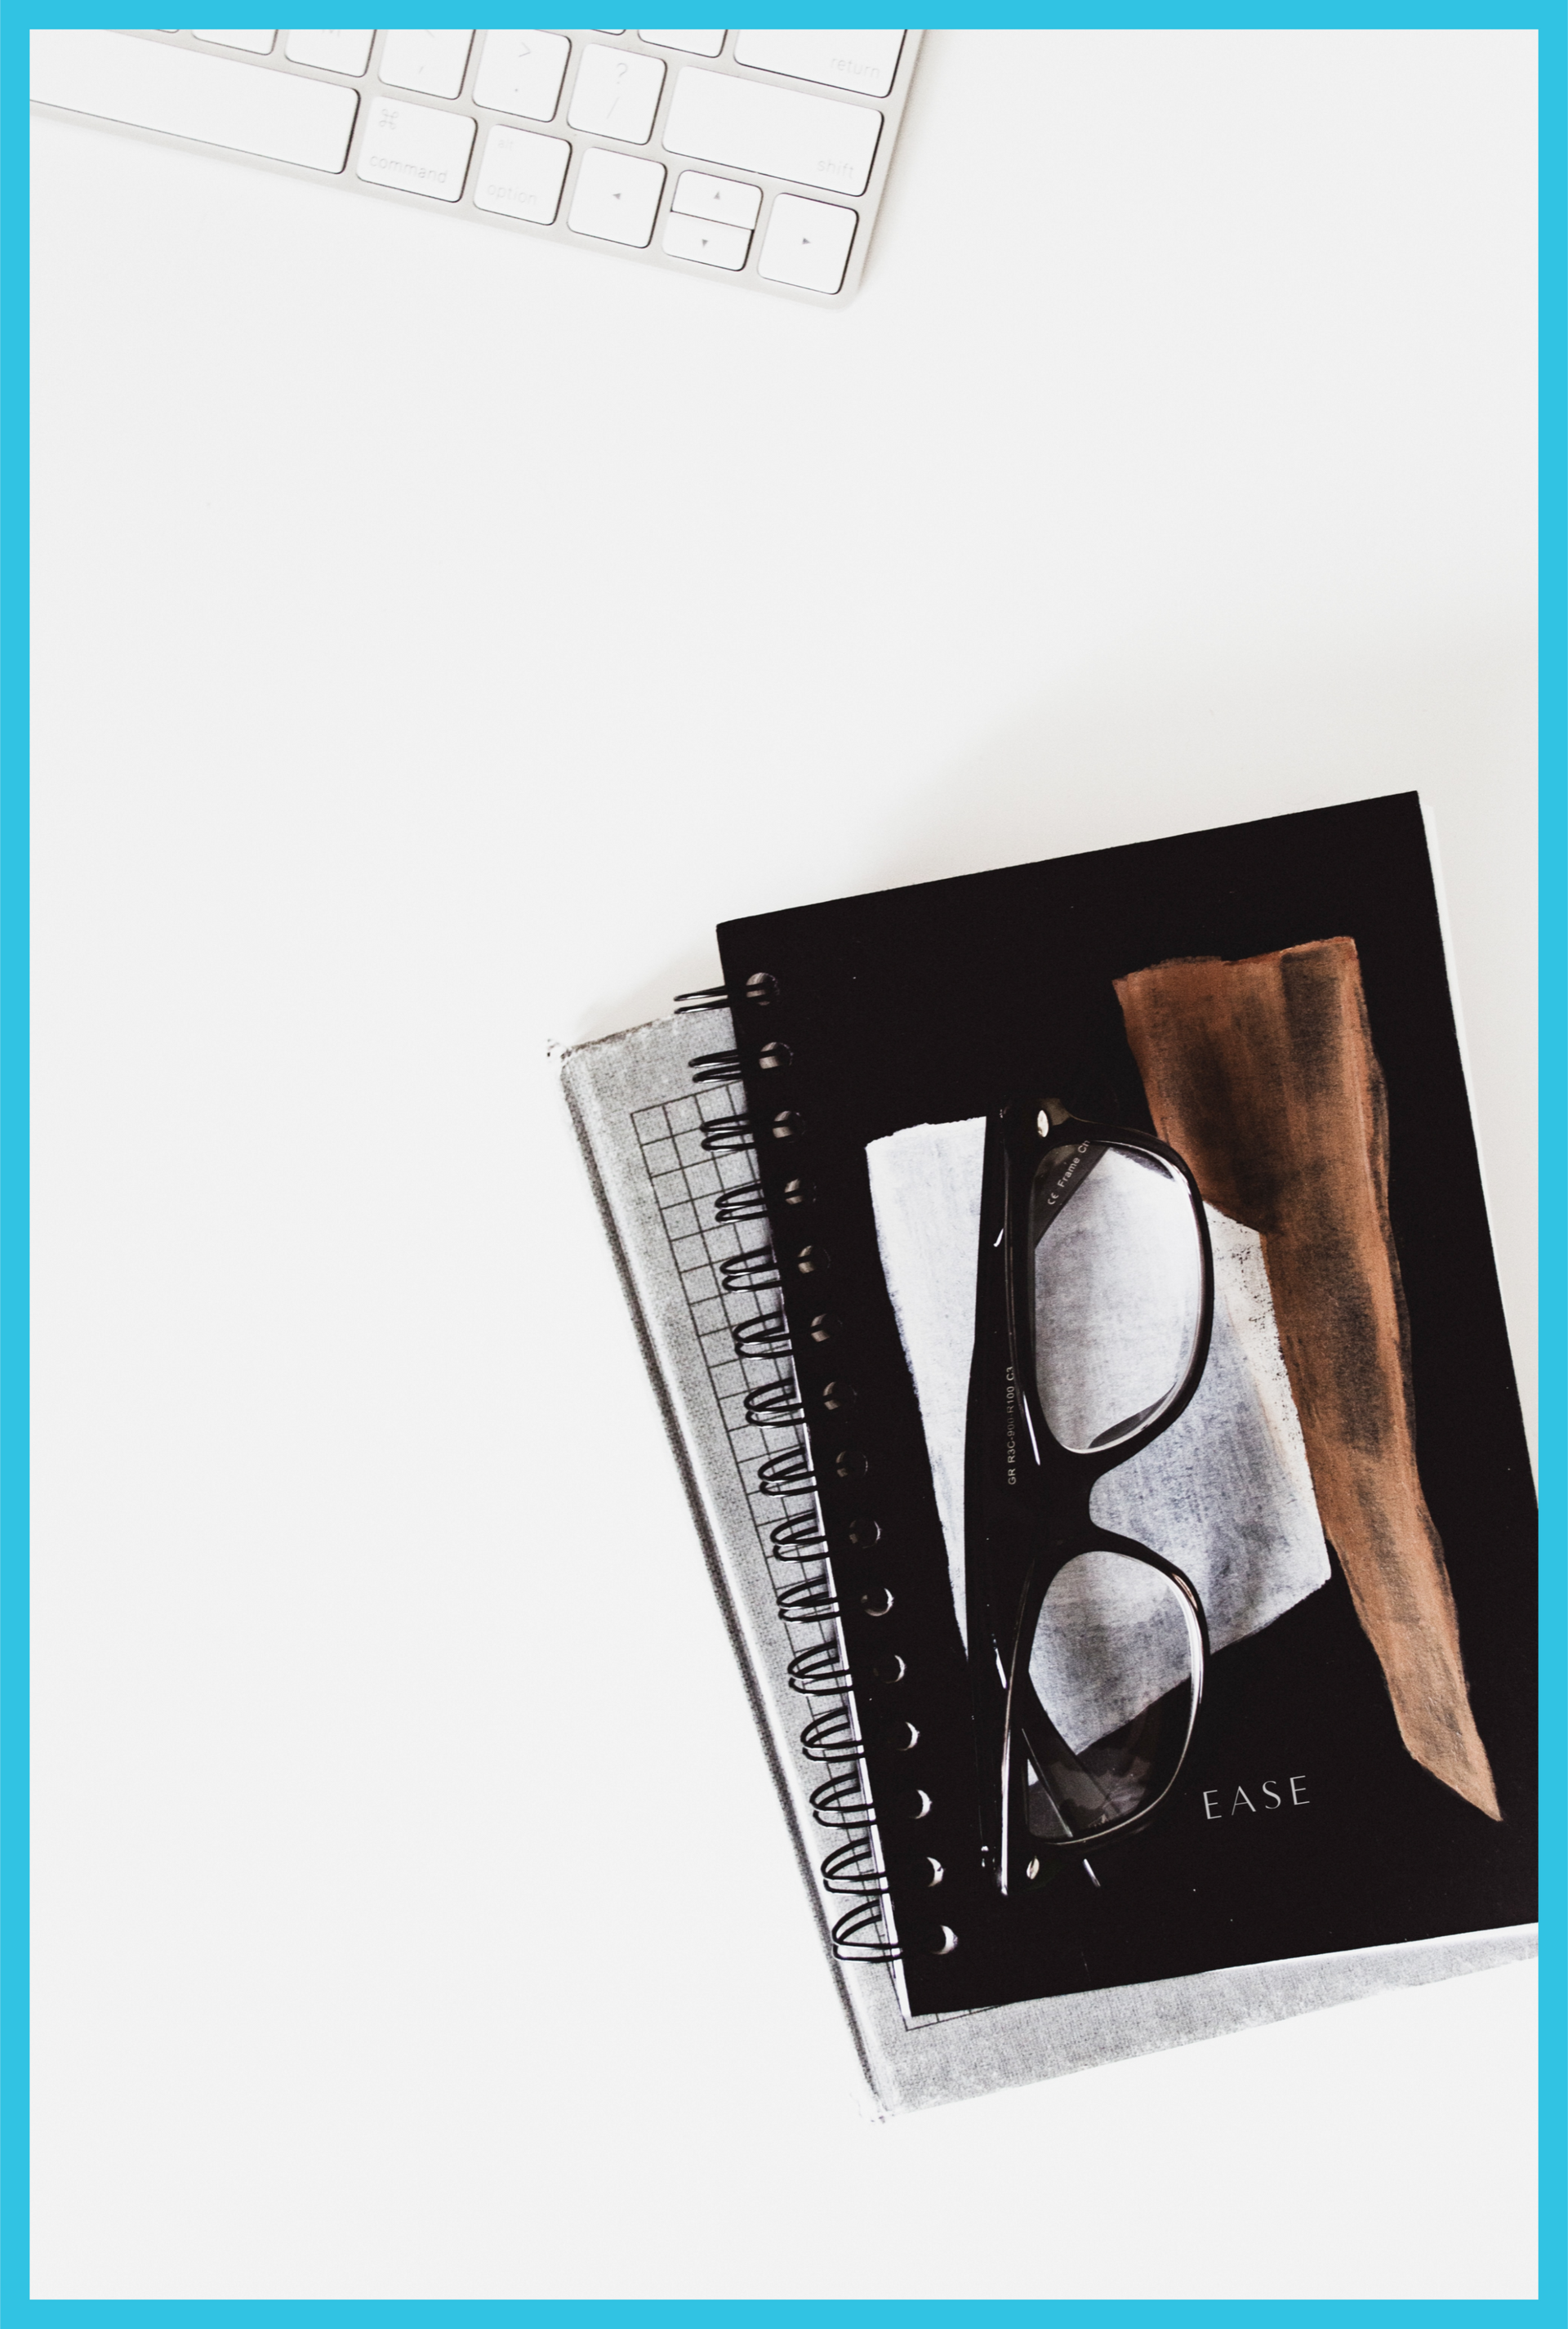 A pair of glasses sits on top of a spiral notebook